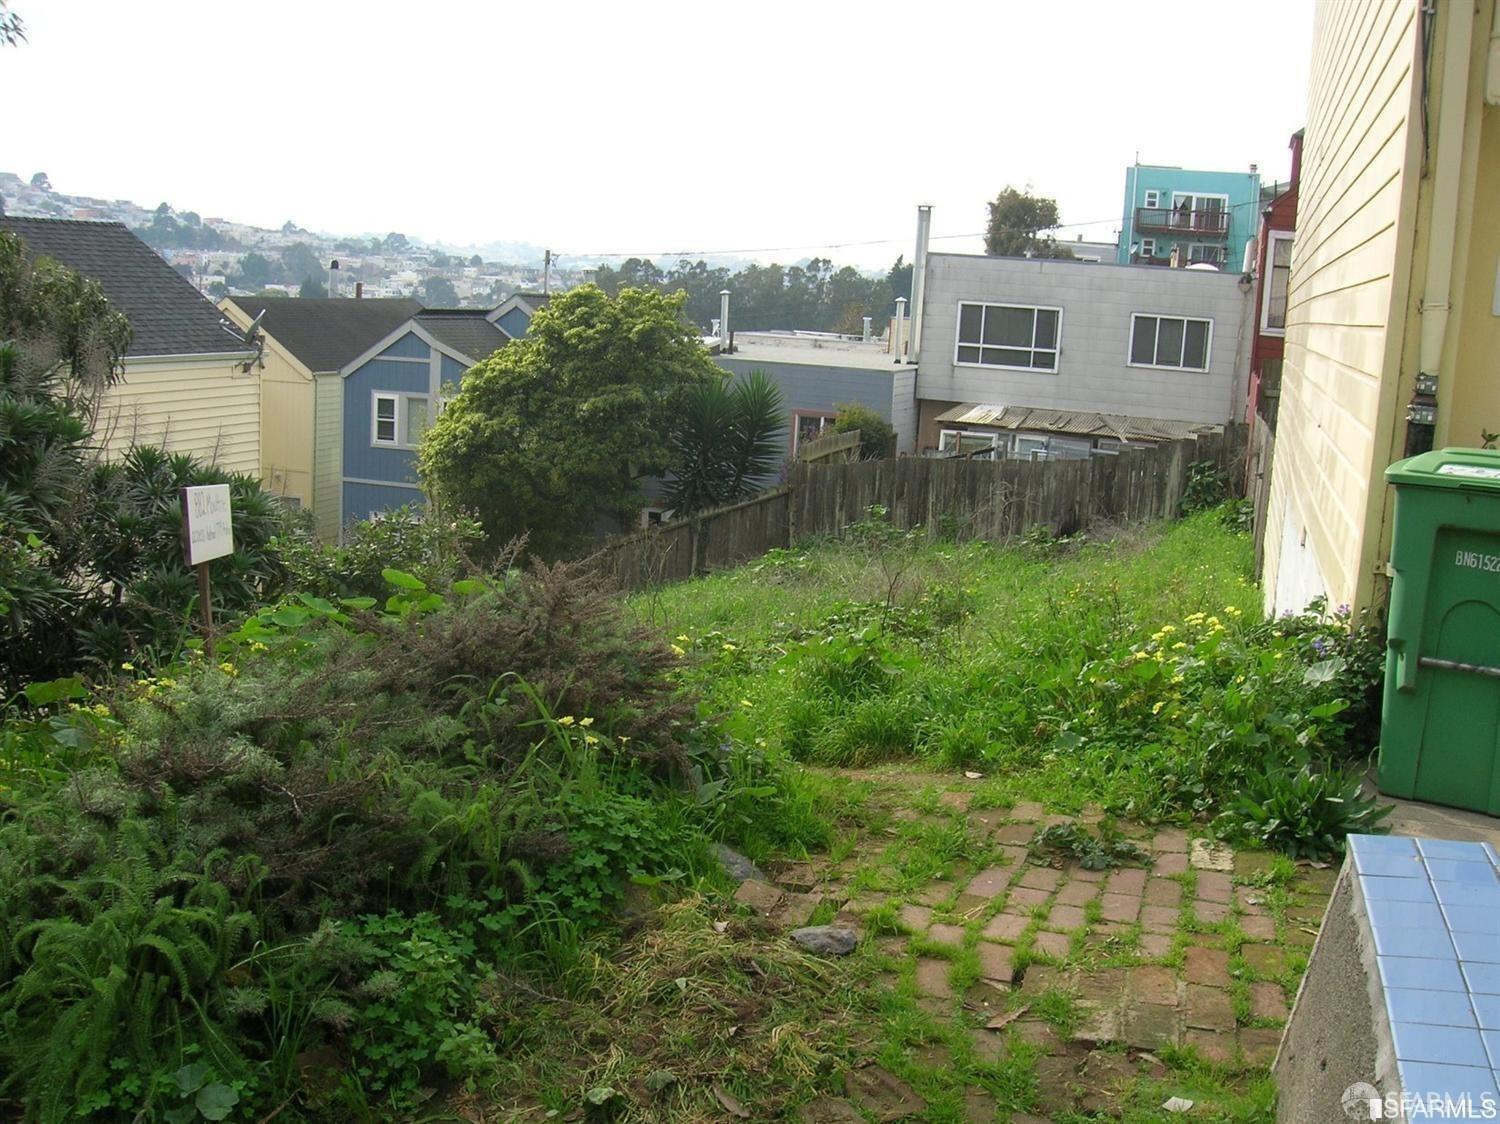 a view of a house with a backyard